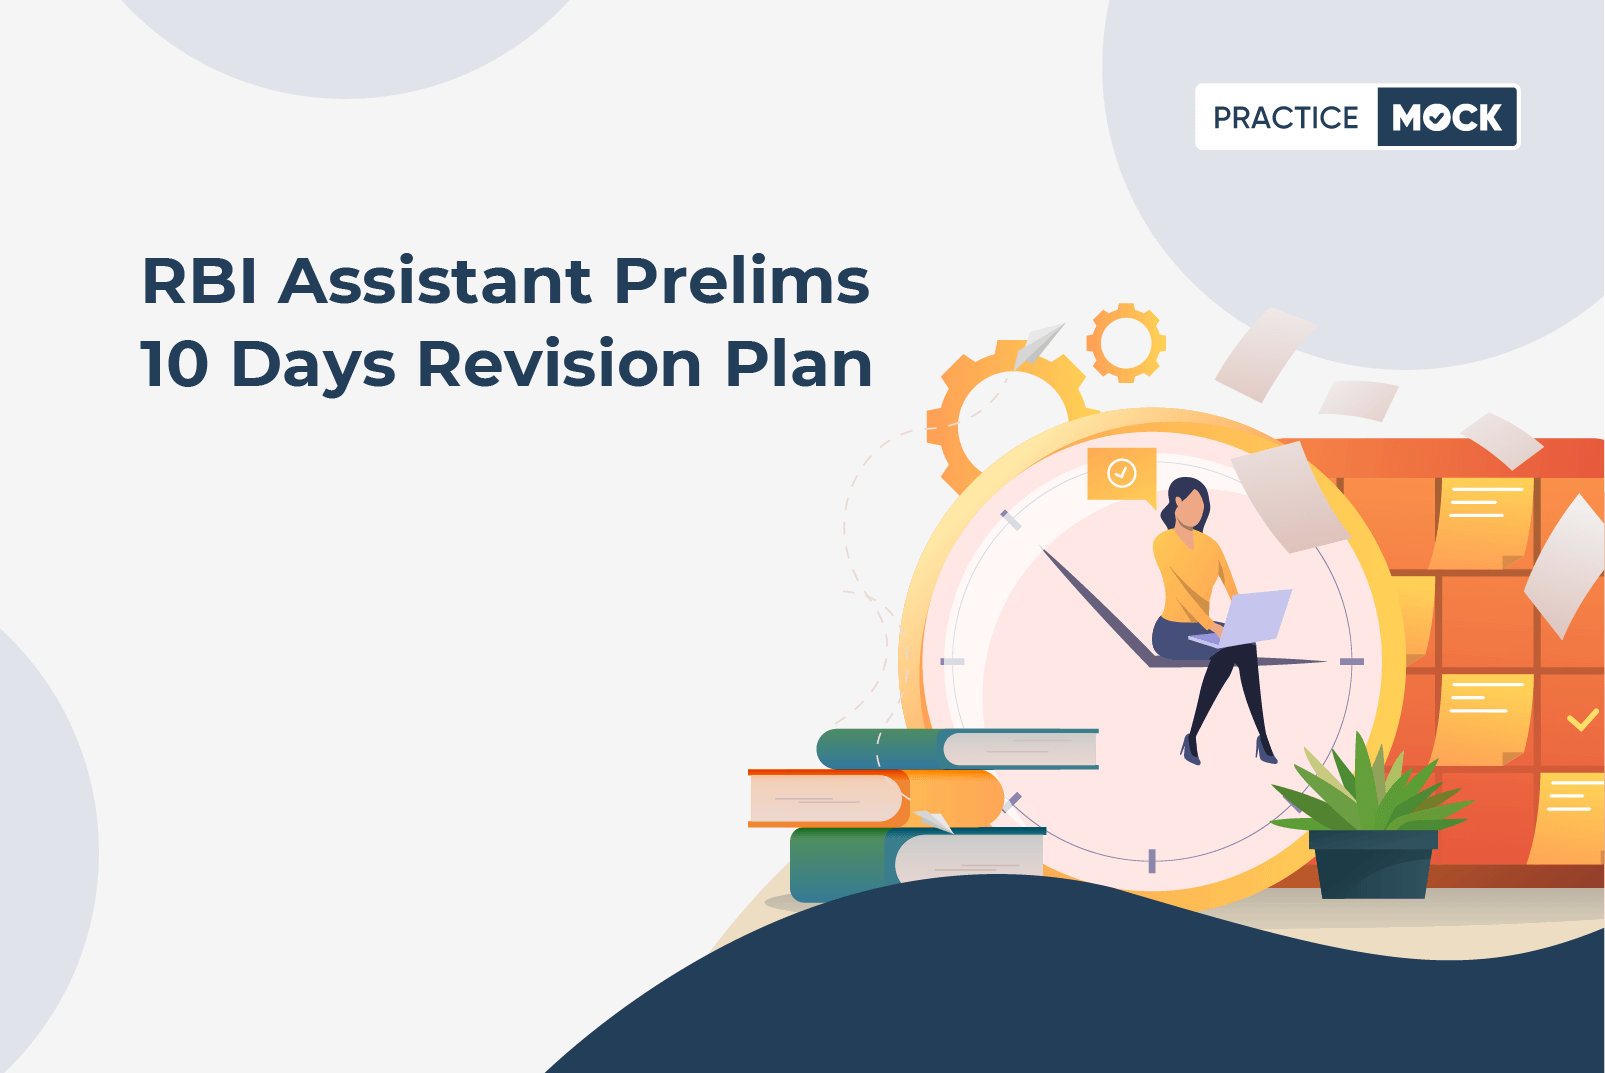 RBI Assistant Revision Plan